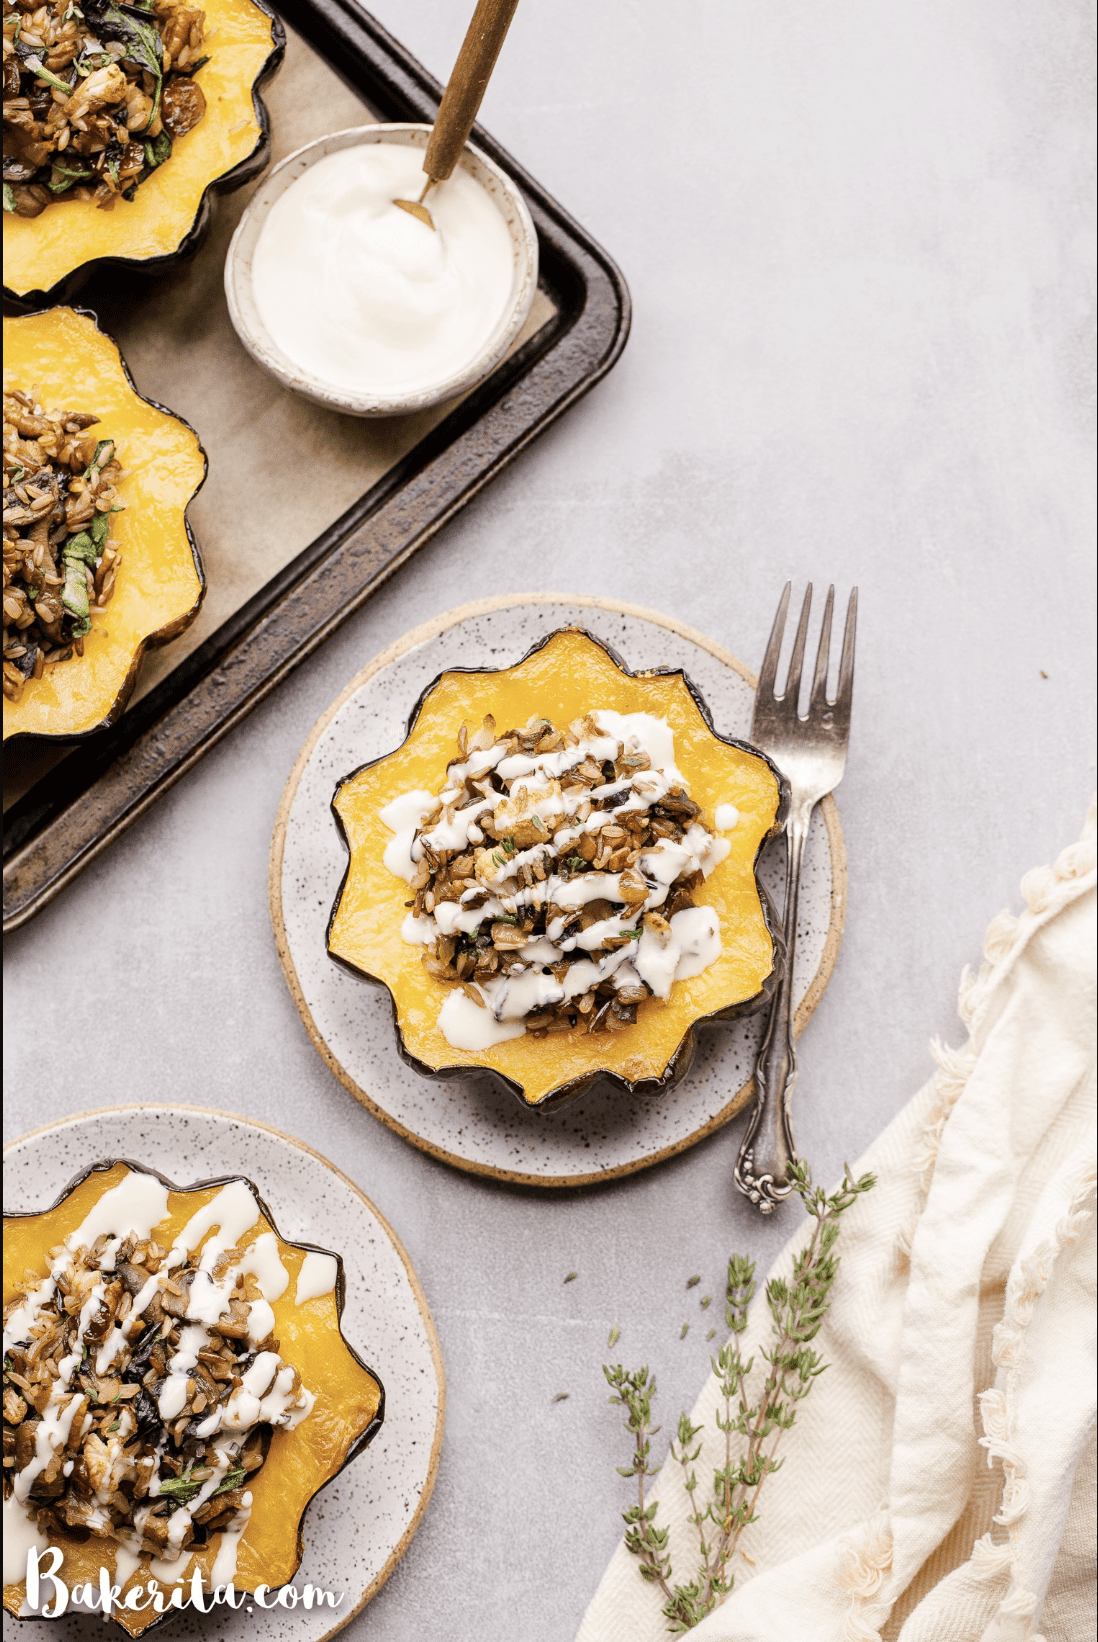 Overhead view of Mushroom & Wild Rice Stuffed Acorn Squash filled with different vegetables and has a drizzle of lemon tahini sauce on top.